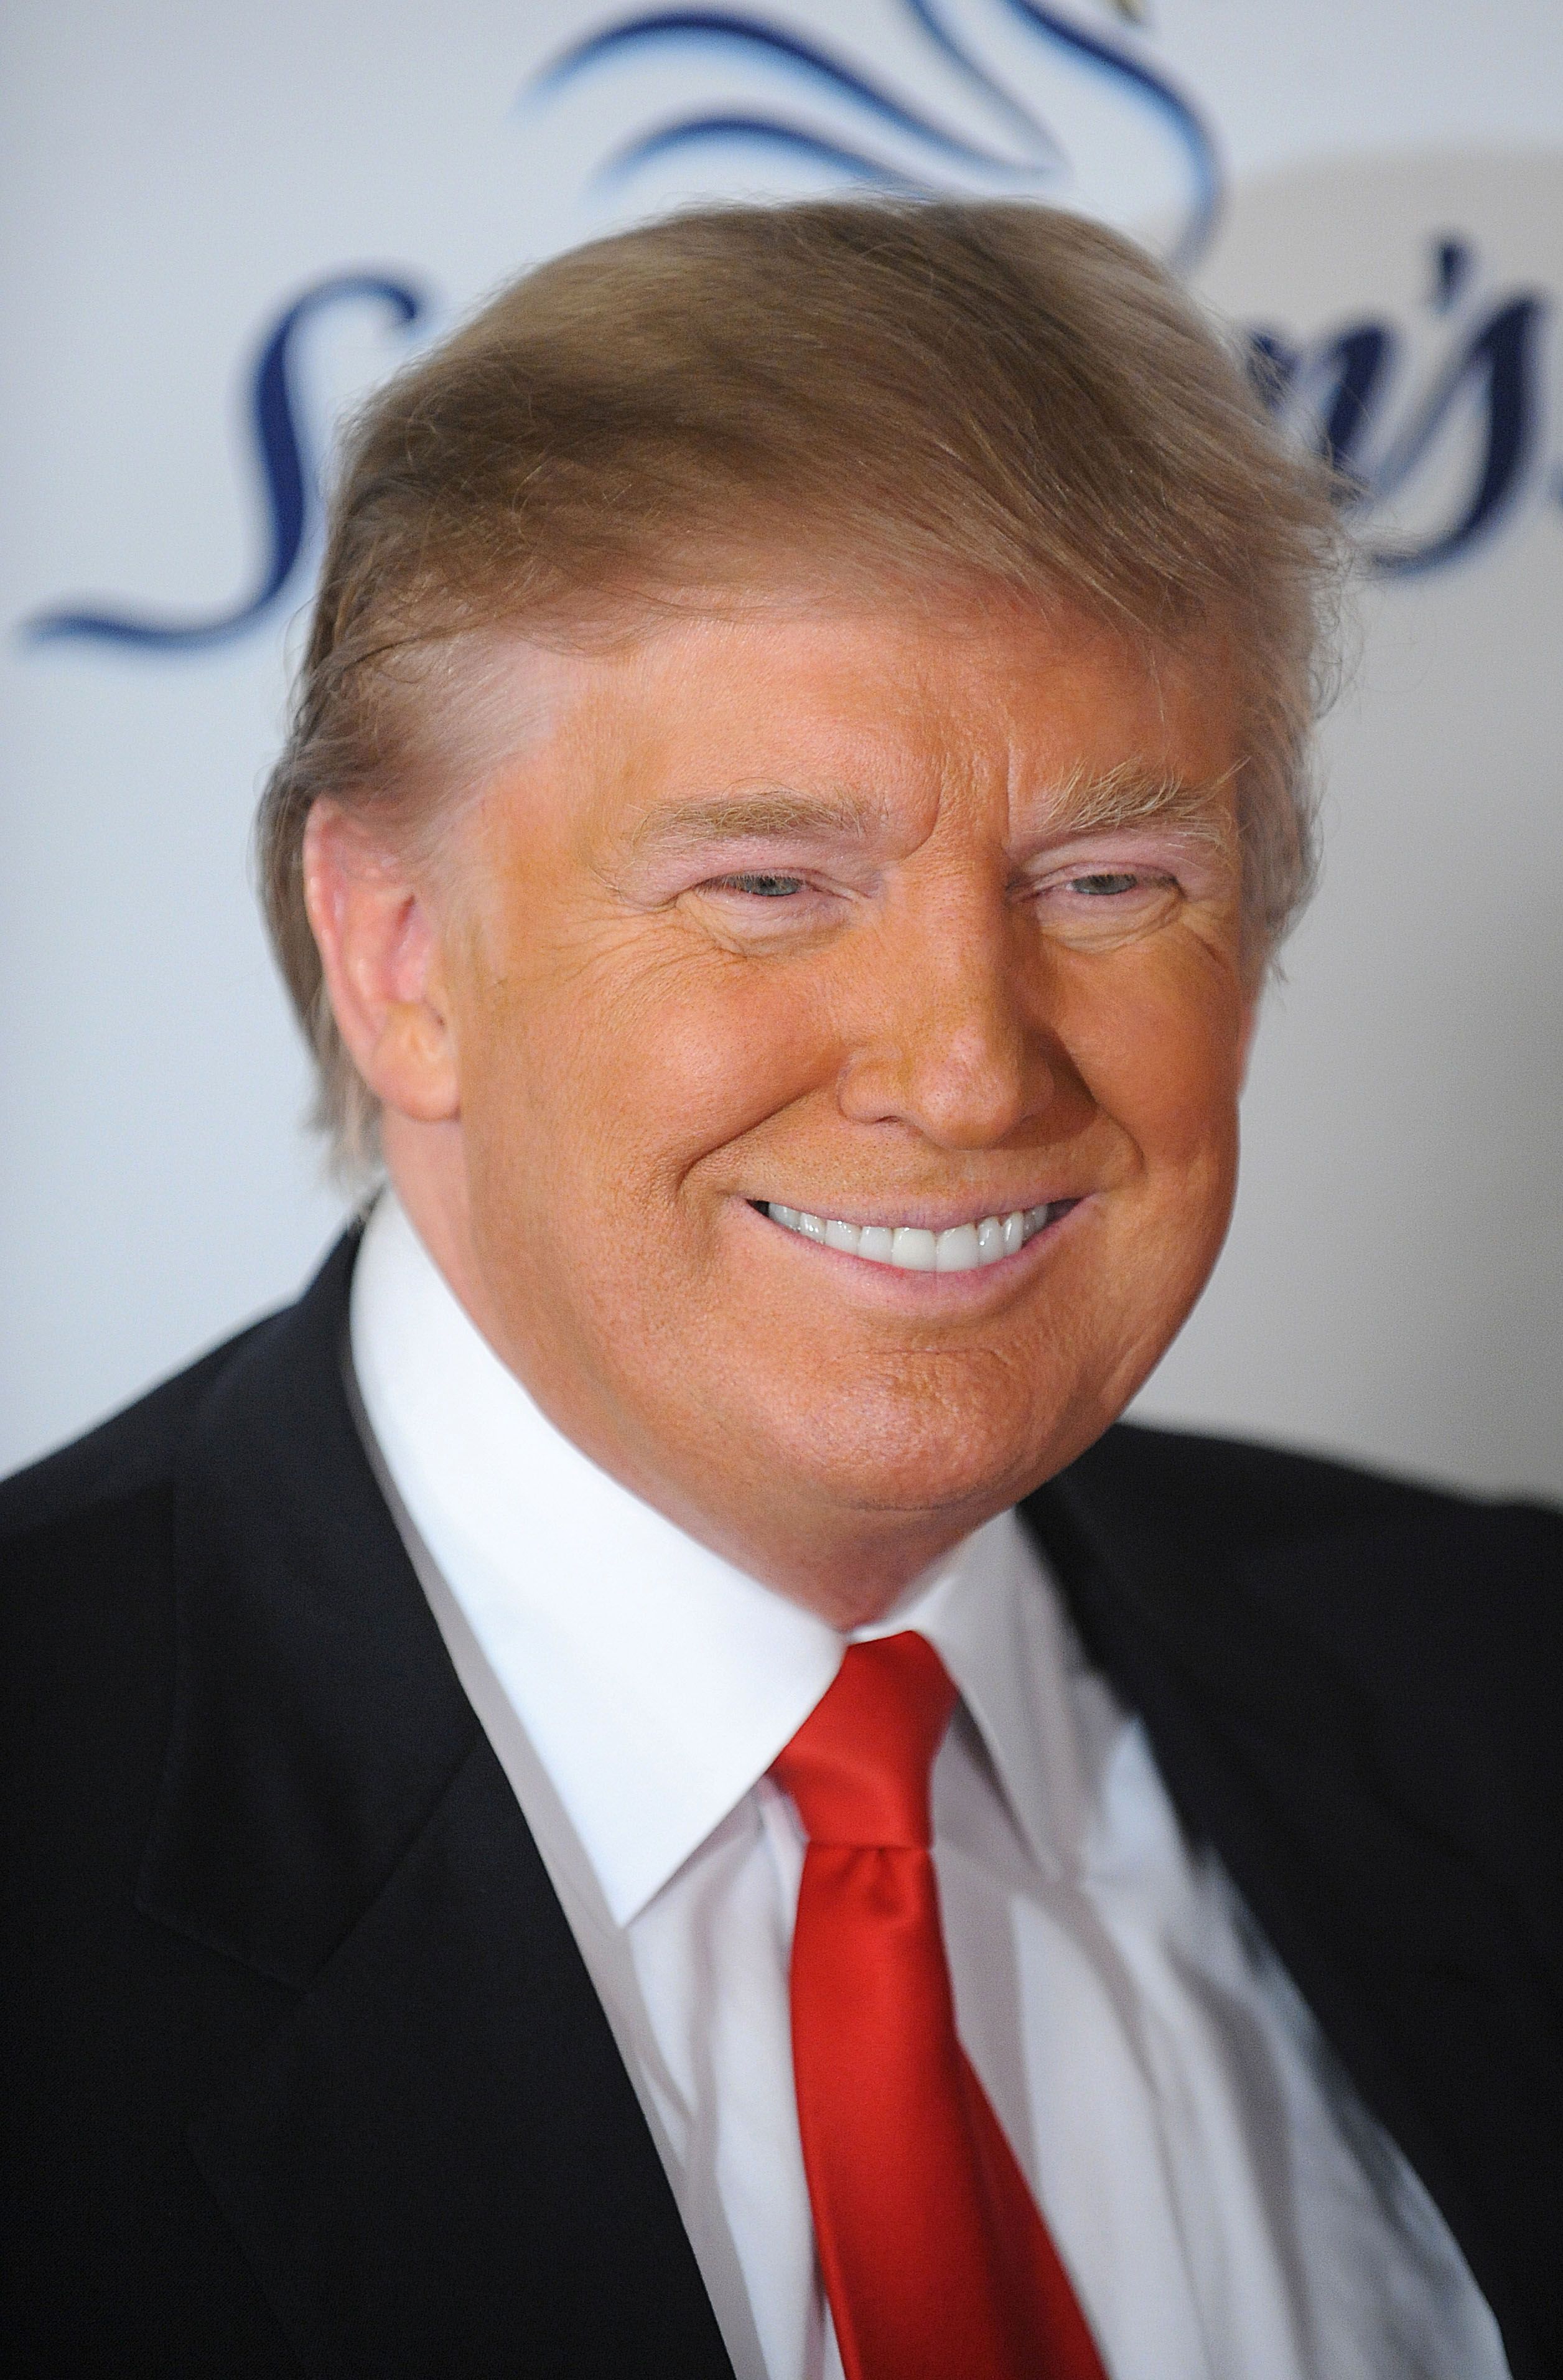 NEW YORK  MAY 10: Donald Trump attends quot;The Celebrity Apprentice 